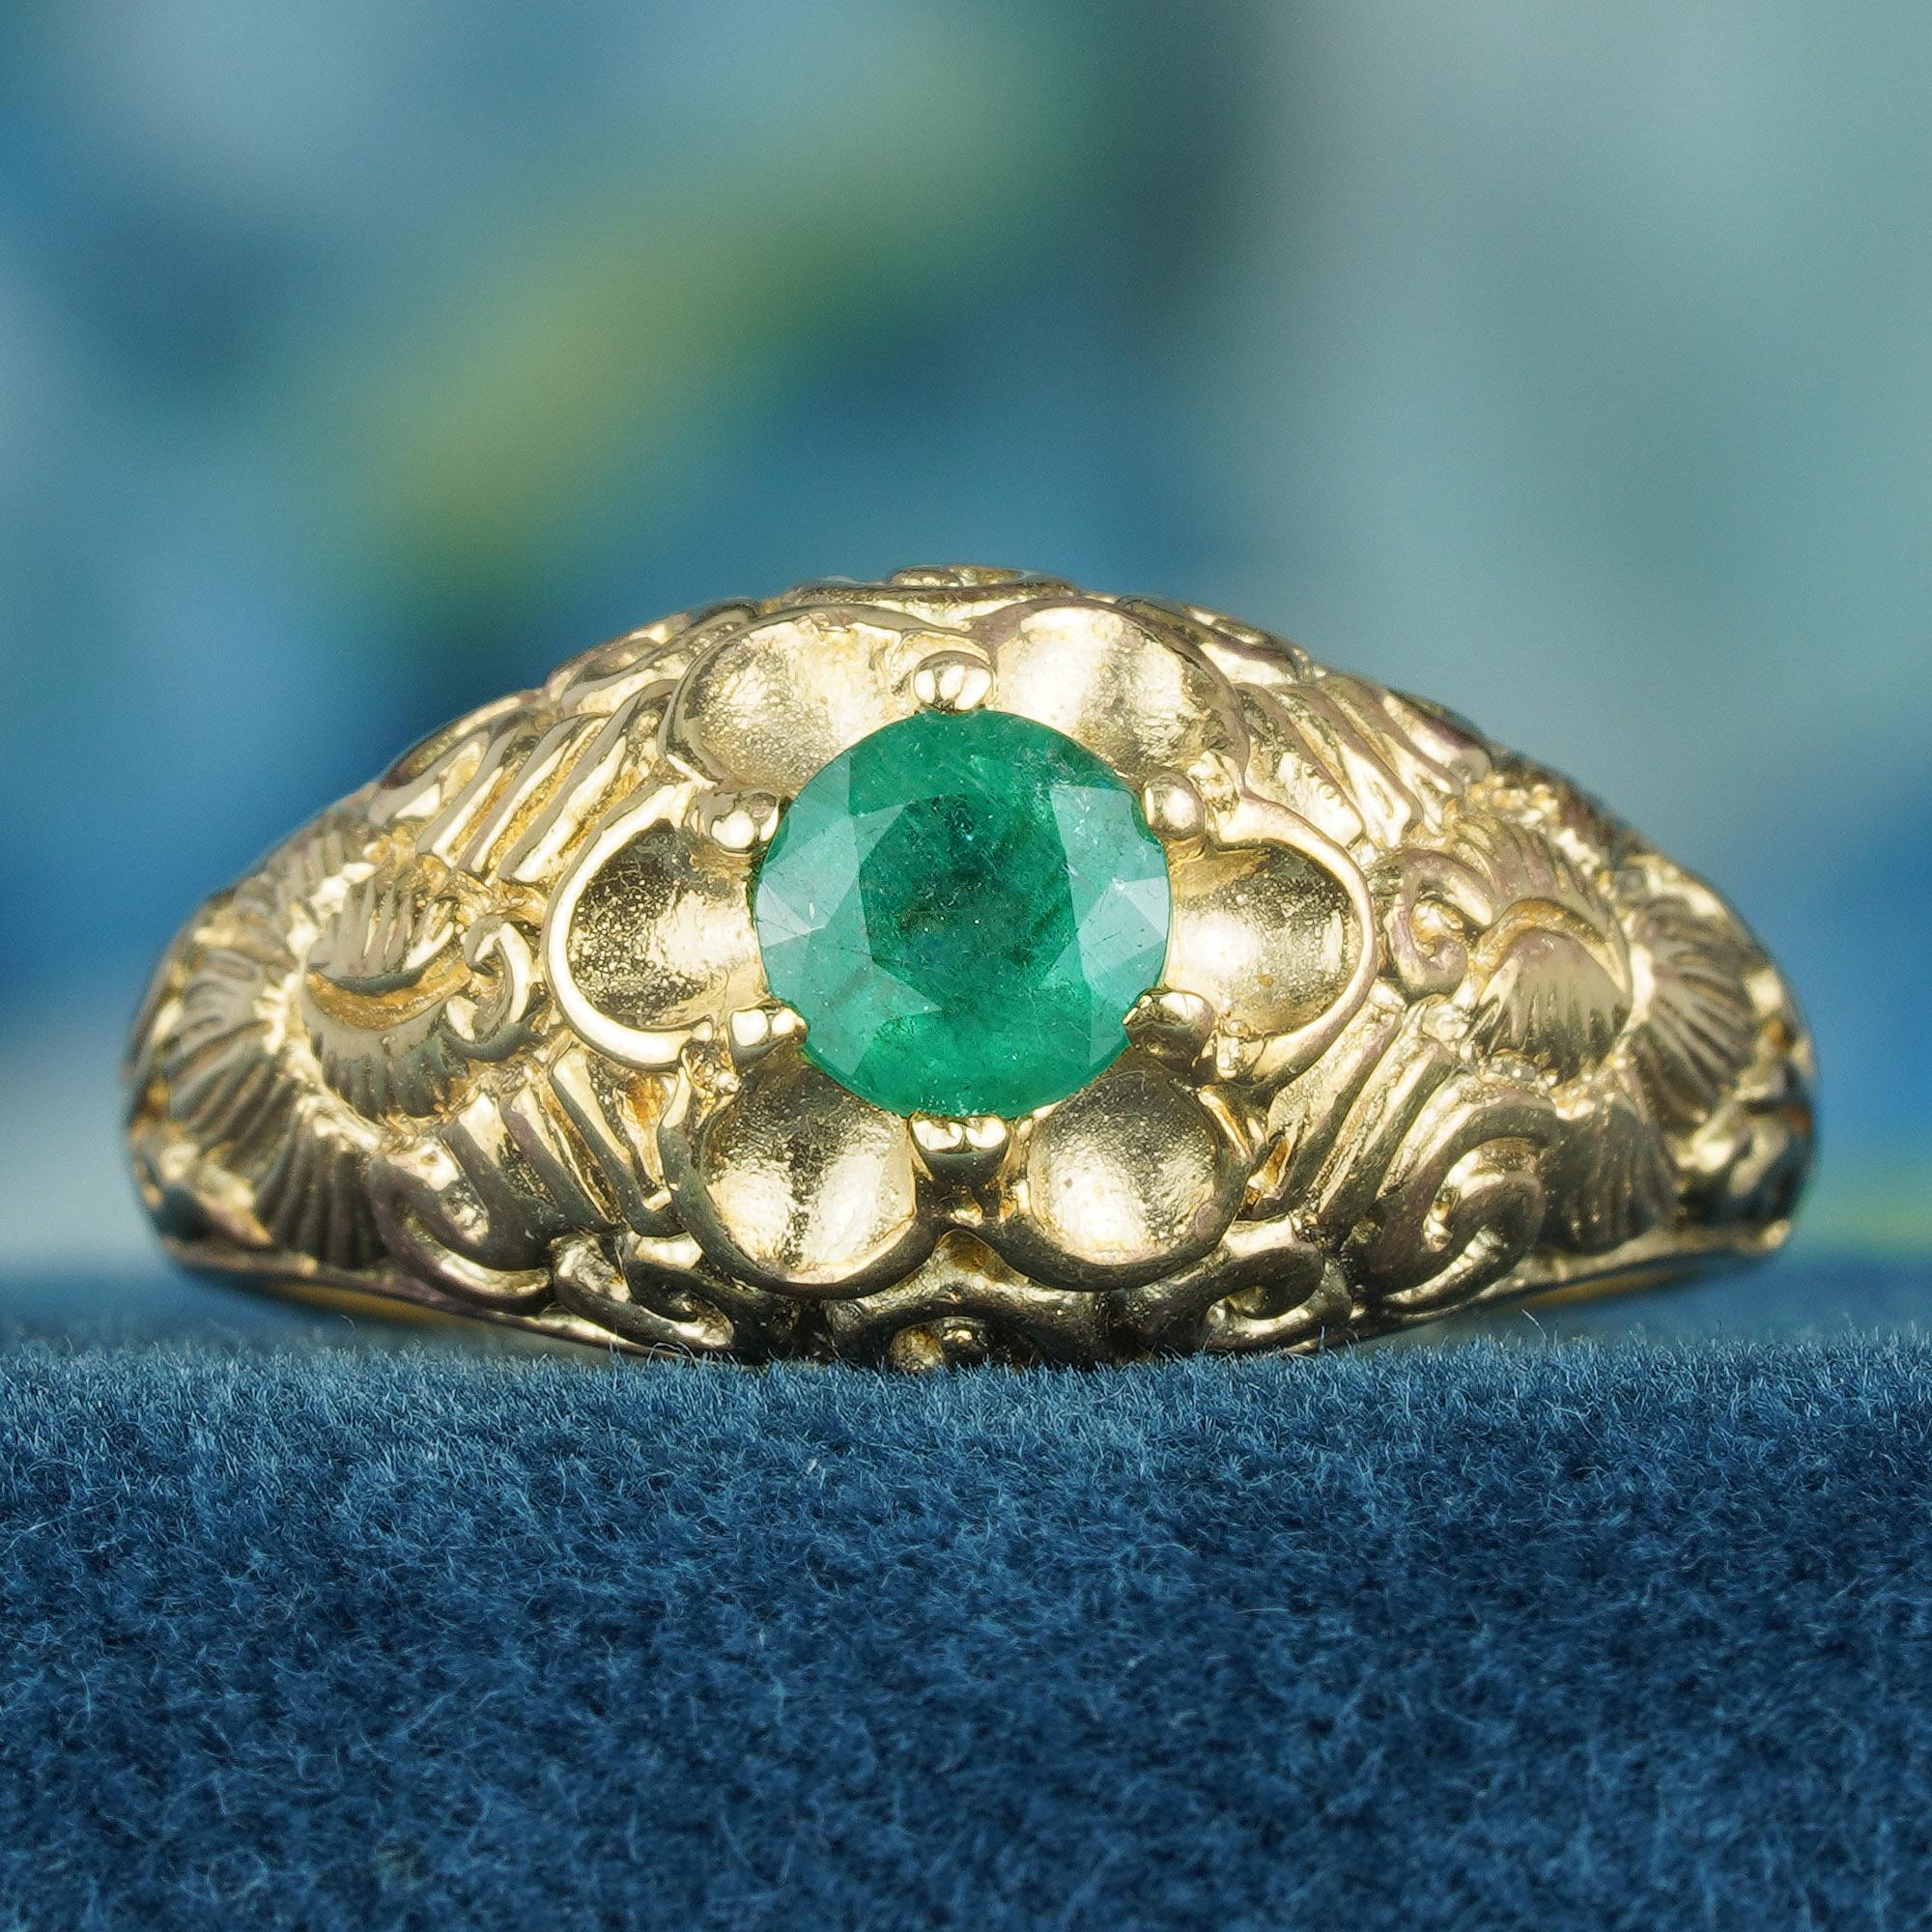 This antique Victorian design large ring showcases a natural, vibrant green, round emerald, creating a striking contrast against the gold setting at the center. The band itself features an ornate floral carved design that further enhances its